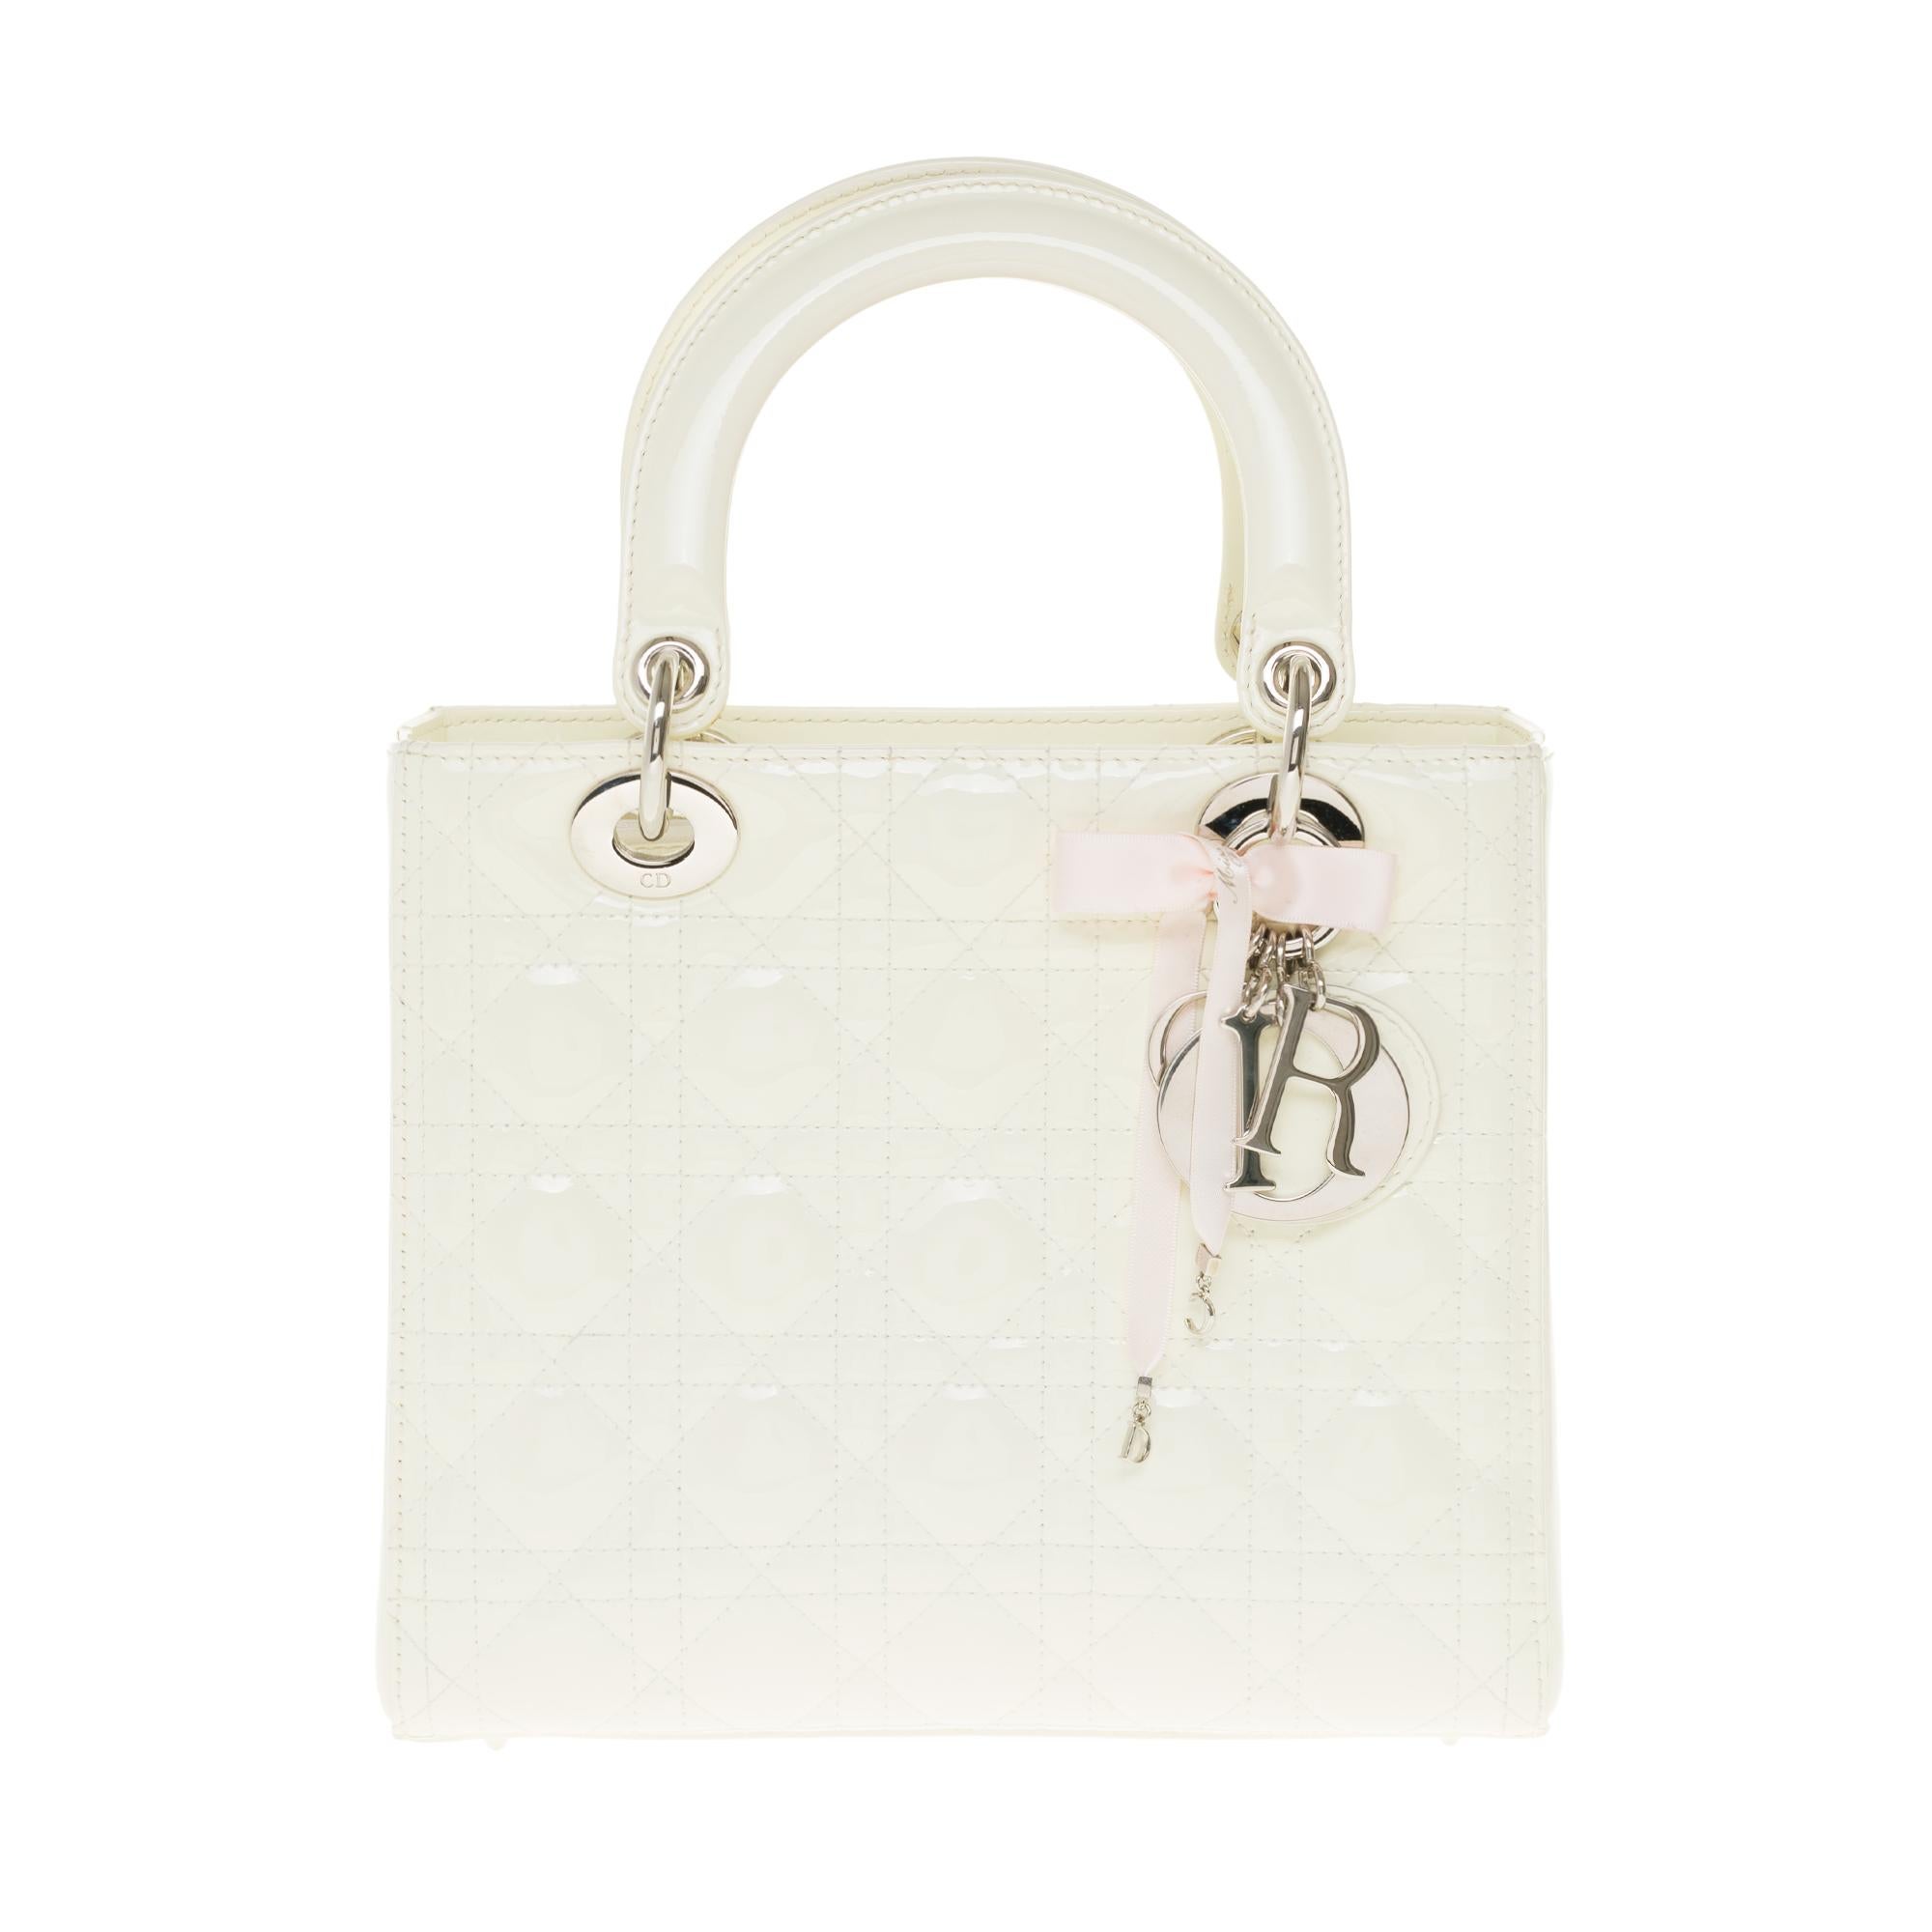 The Lady Dior bag perfectly embodies the vision of elegance and beauty of the House of Dior. Refined and feminine, it is a timeless creation and yet always current.
Crafted from white patent calfskin with Cannage stitching, its legendary quilted